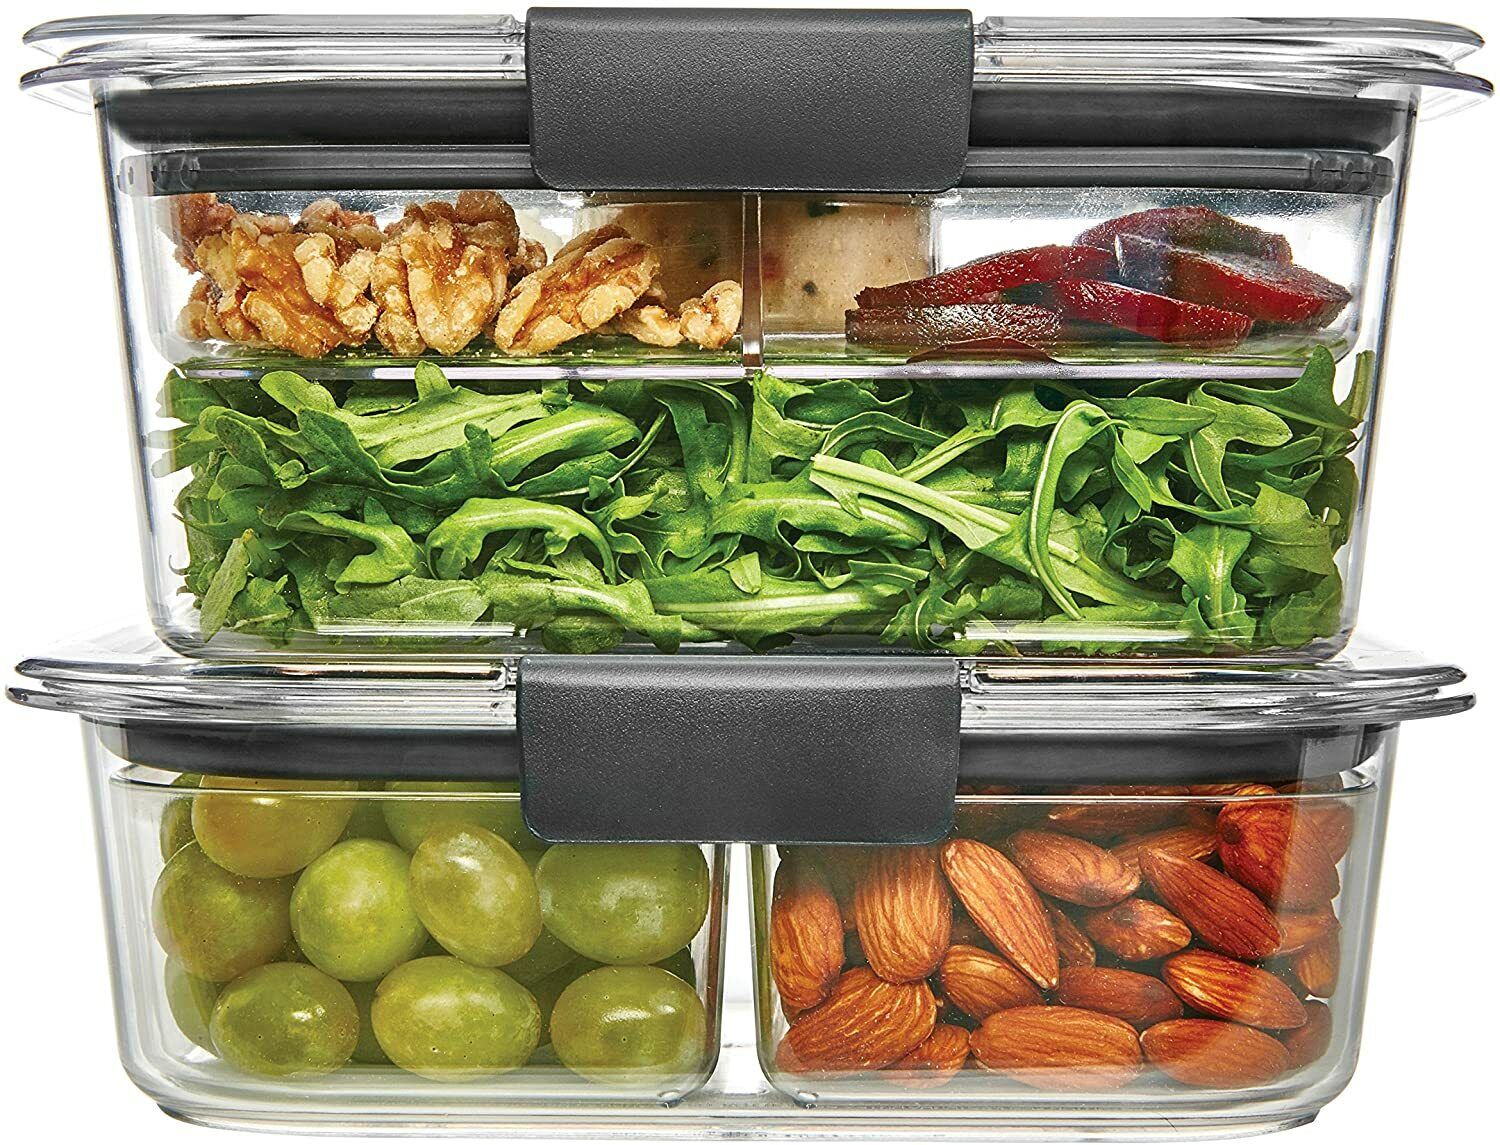 Rubbermaid Brilliance Food Storage Container, Salad and Snac